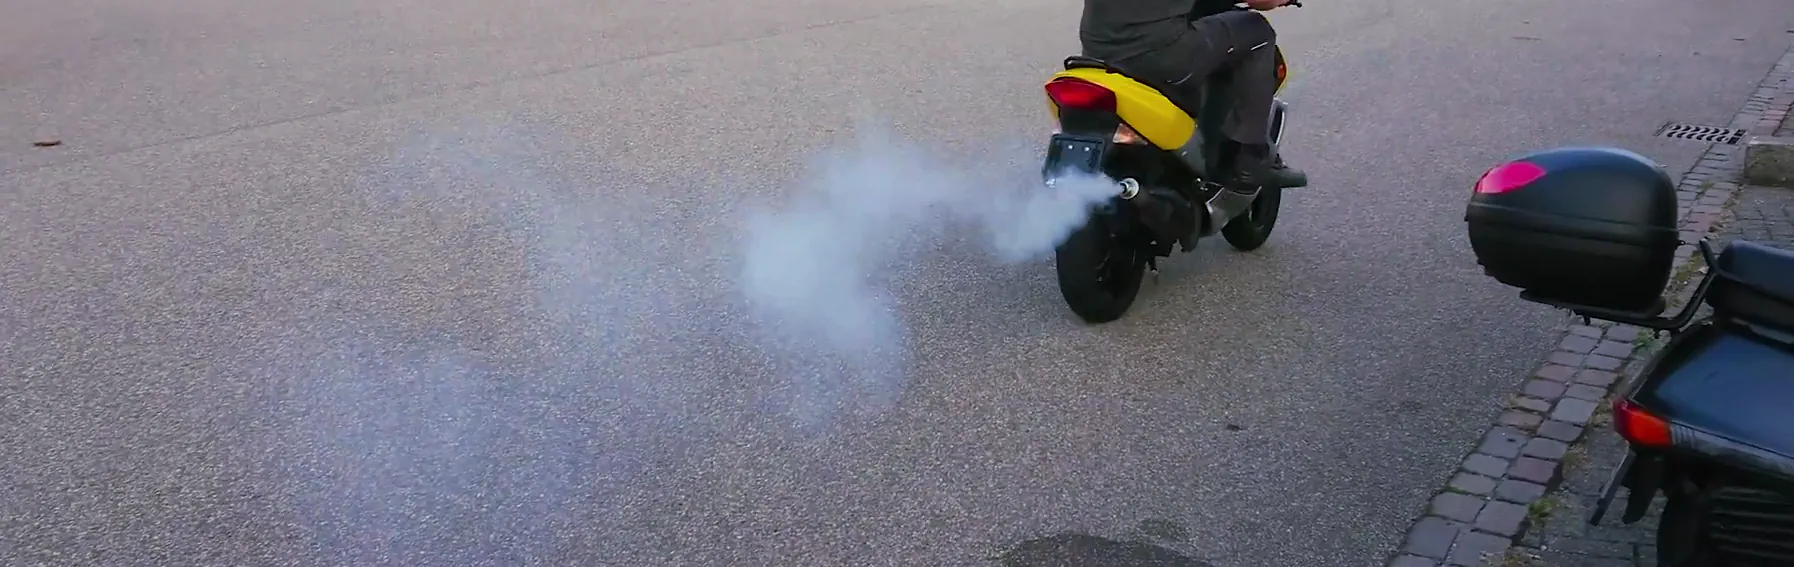 Polluting a motor scooter (Peugeot Speedfight 2) with two-stroke engine expels a jet of toxic exhaust fumes from the tailpipe